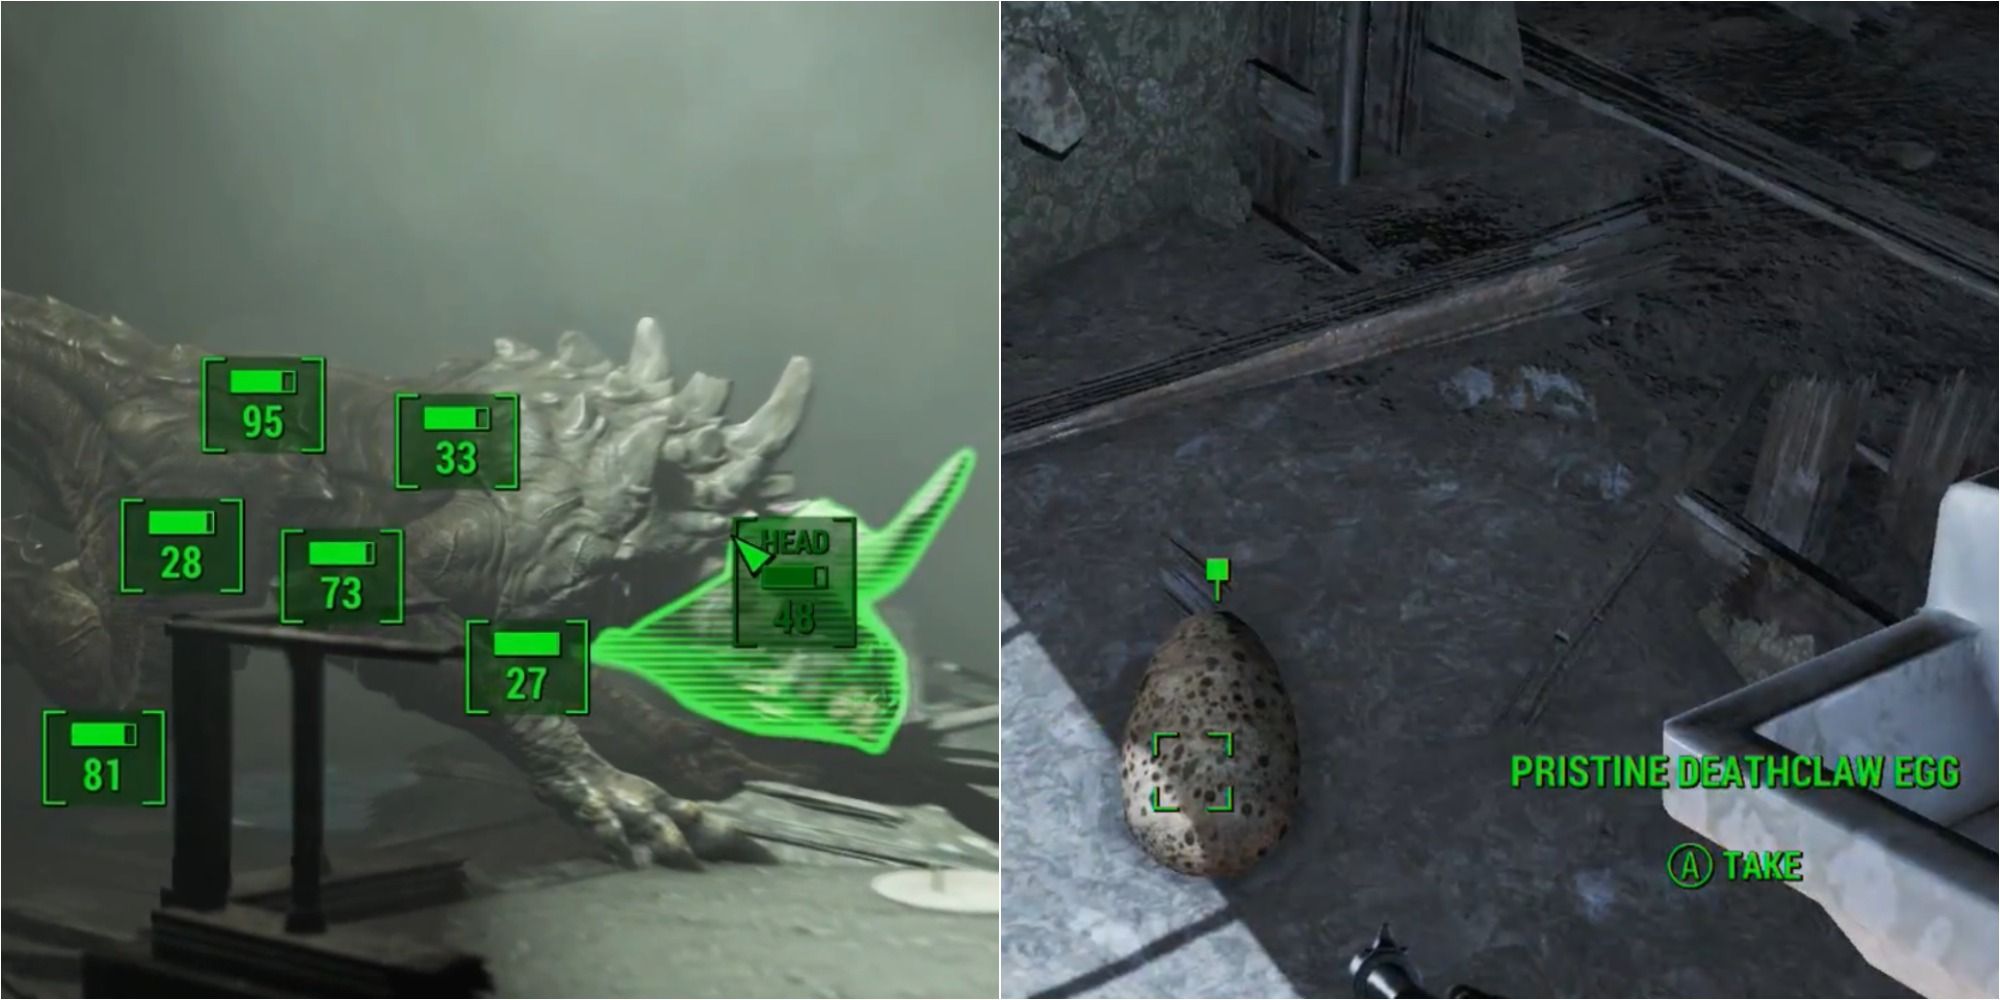 Fallout 4: What Should You Do With The Pristine Deathclaw Egg?